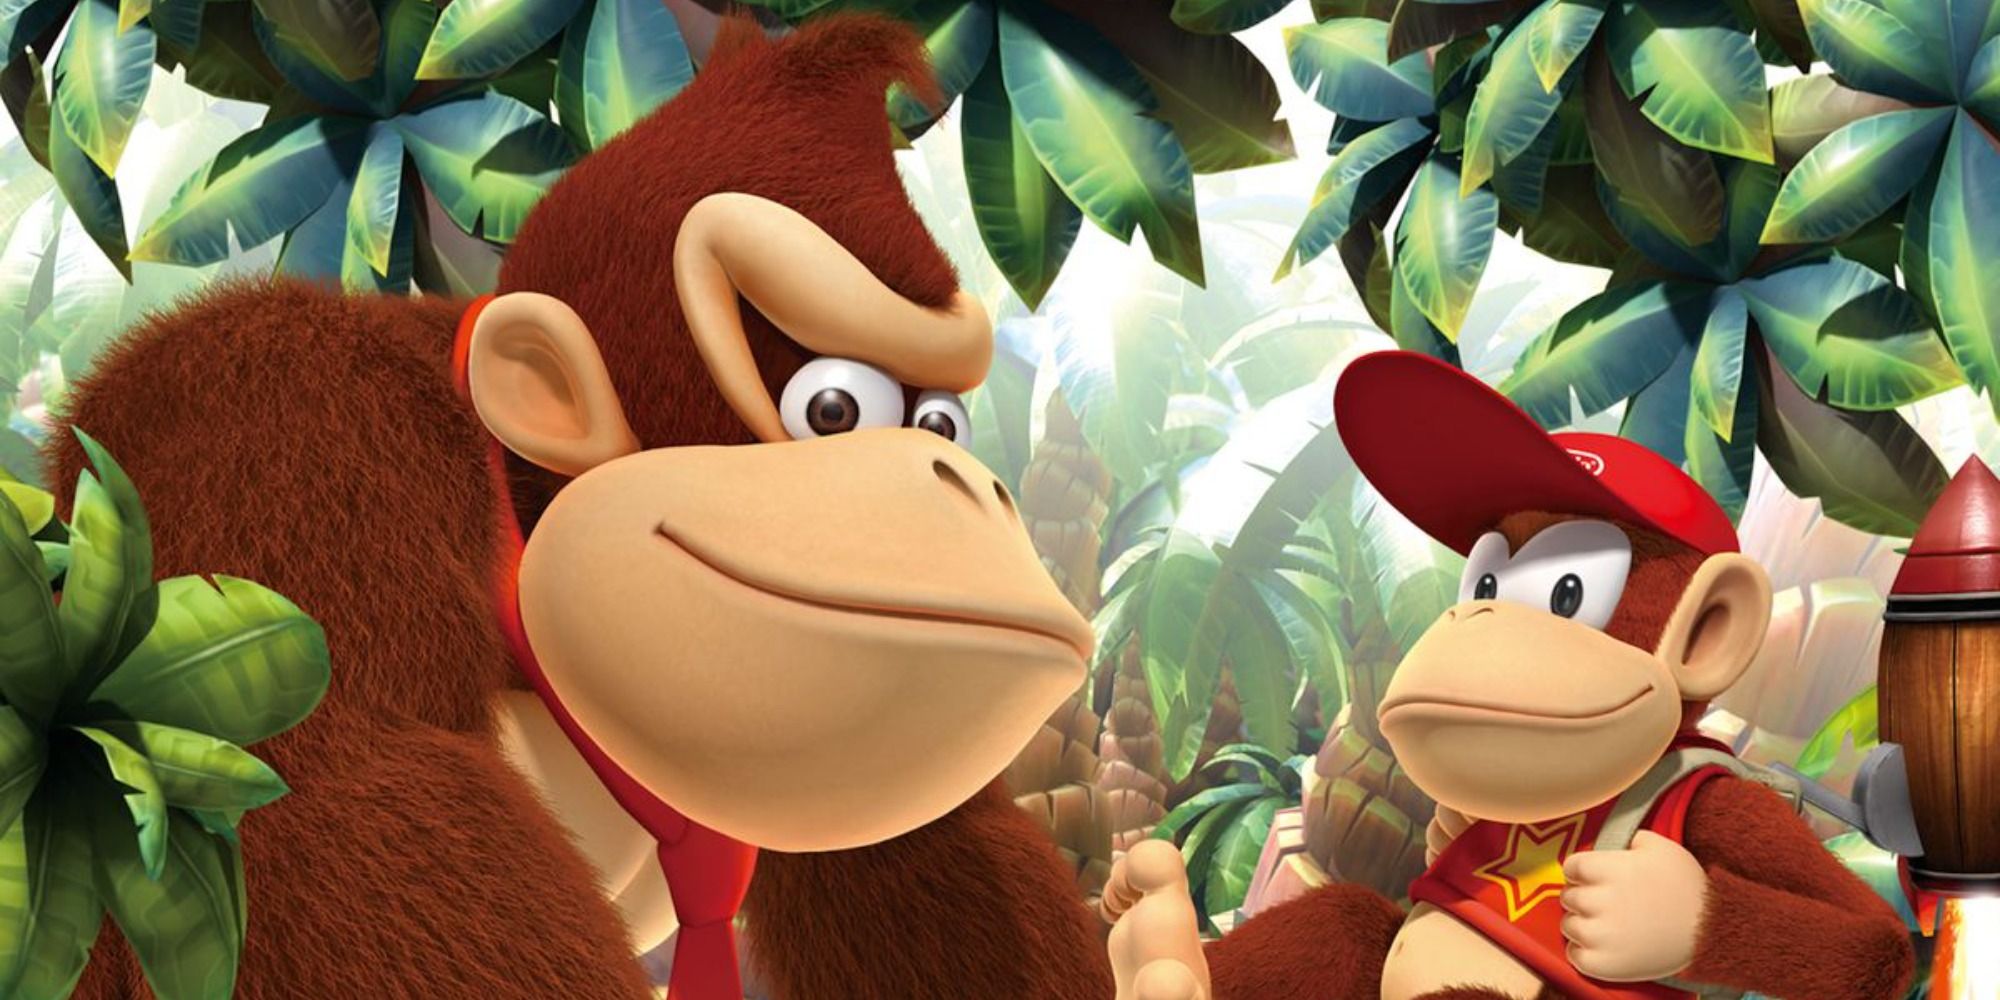 Donkey & Diddy Kong with Donkey Kong on the left and Diddy on the right